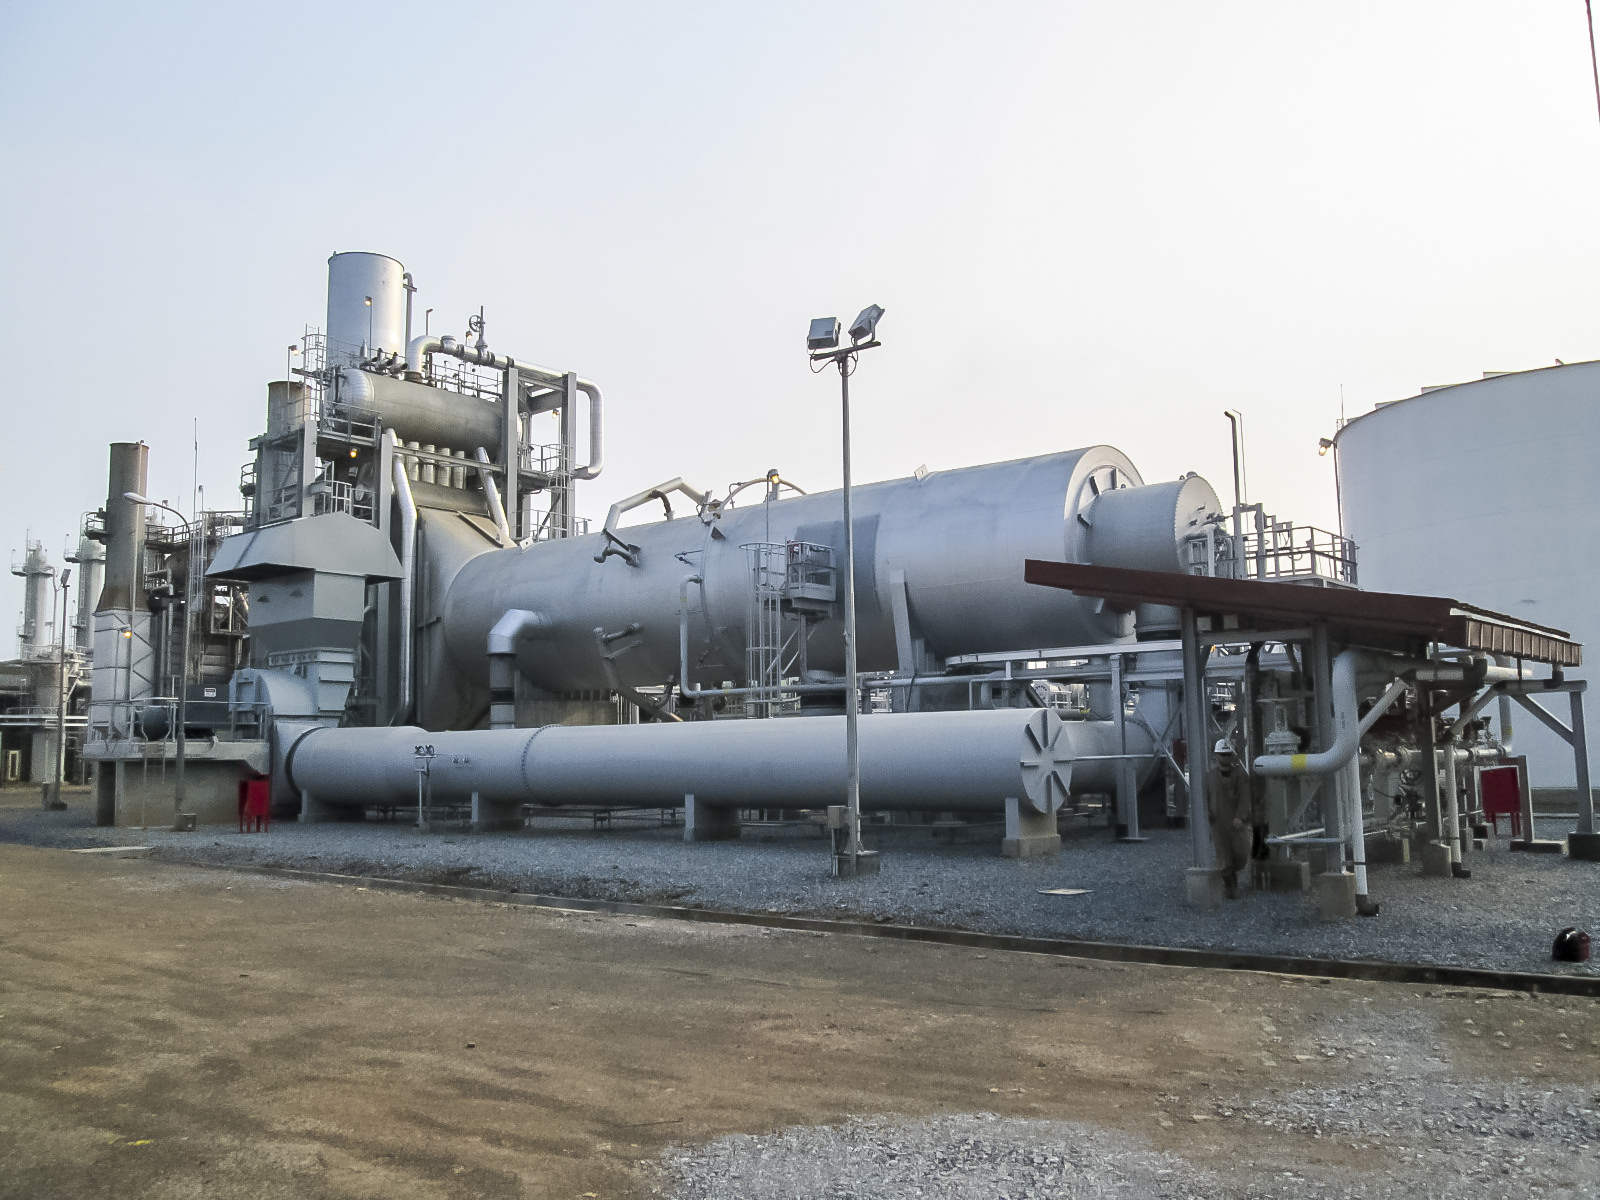 Wide shot of a Specialty Thermal Oxidizer